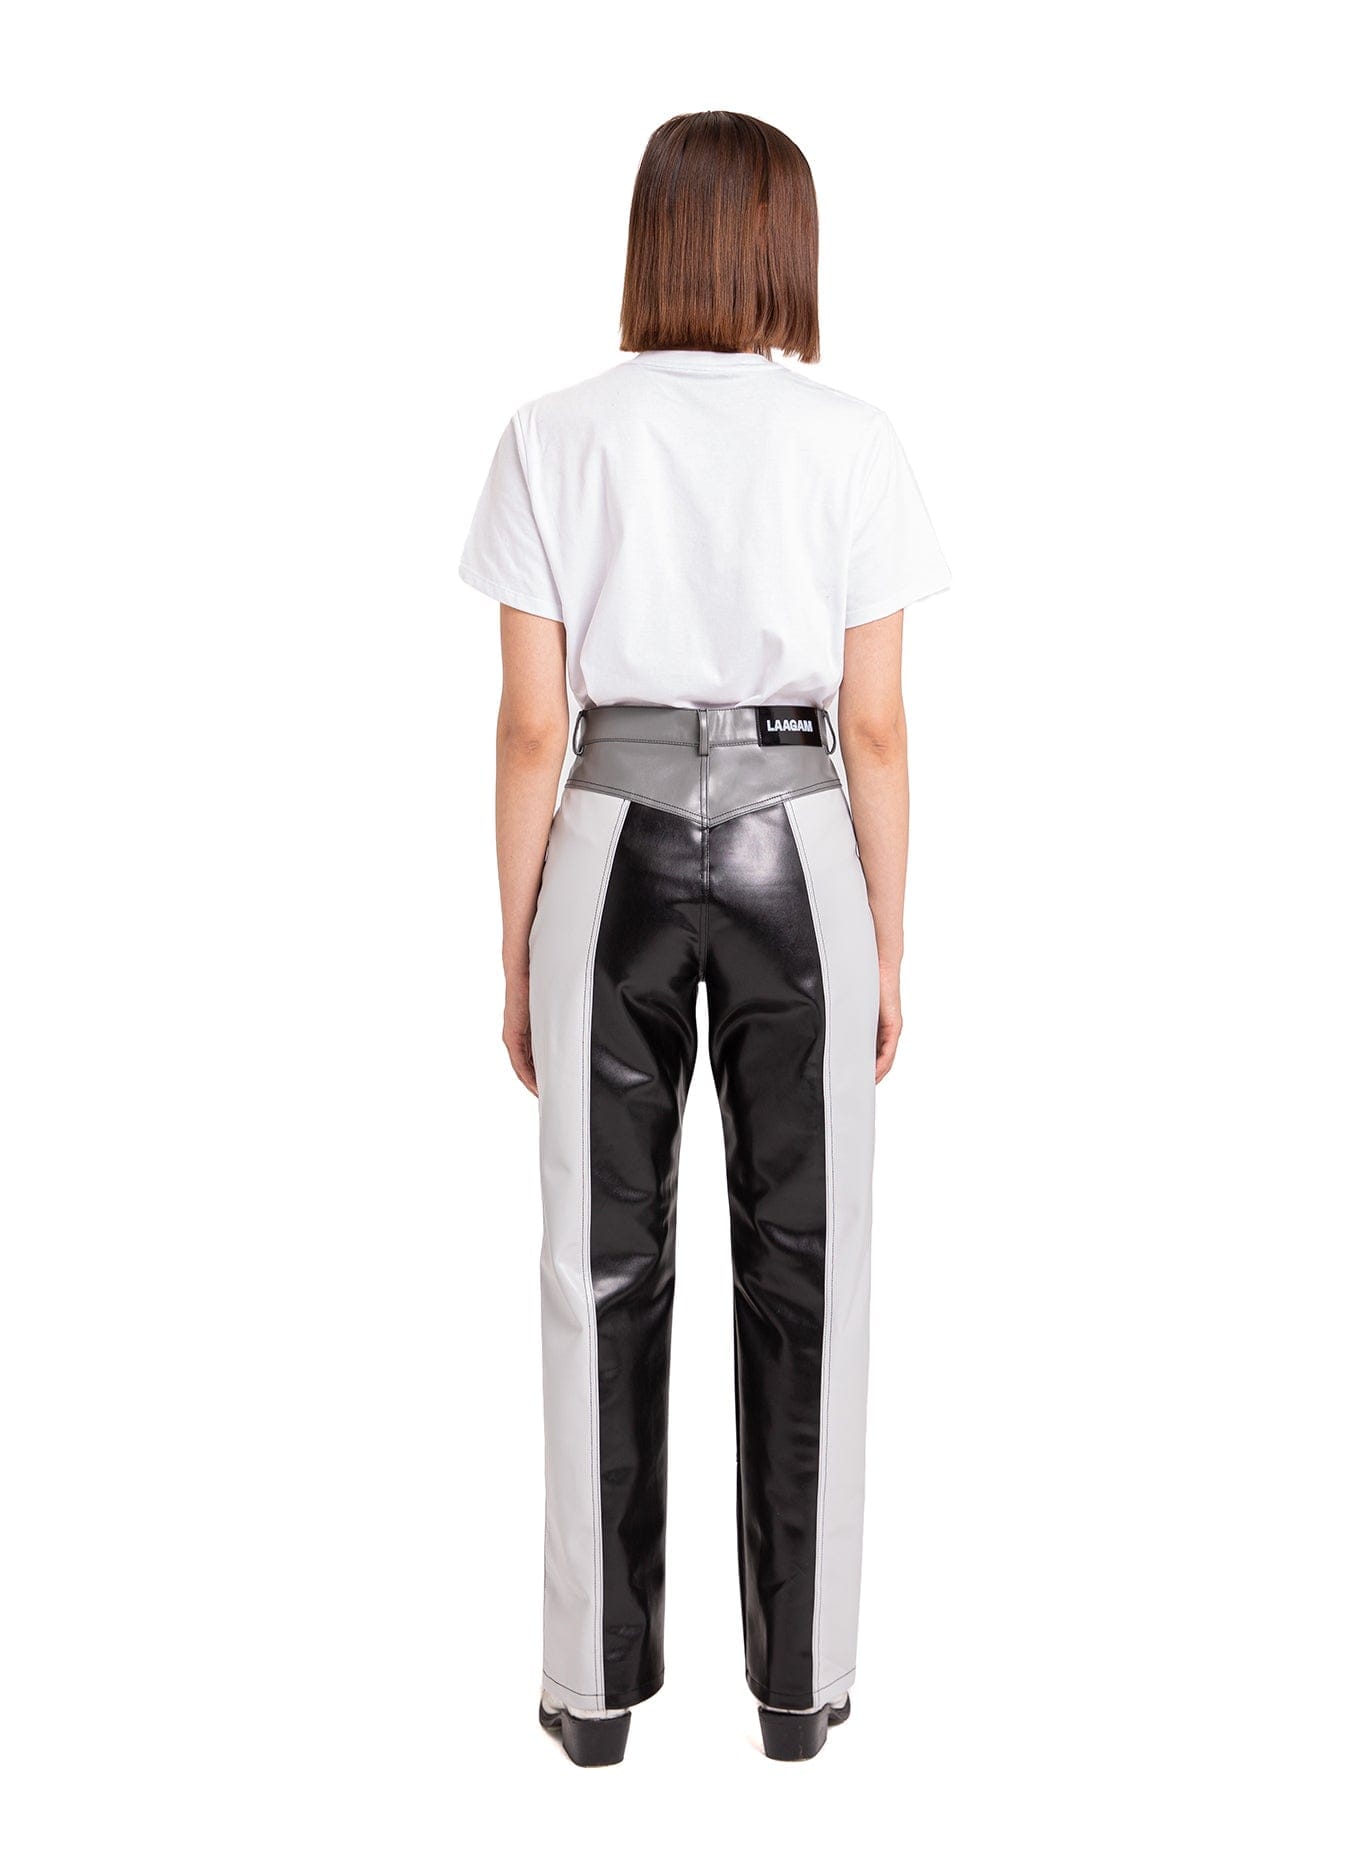 LAAGAM - MADDOX FAUX LEATHER PANTS